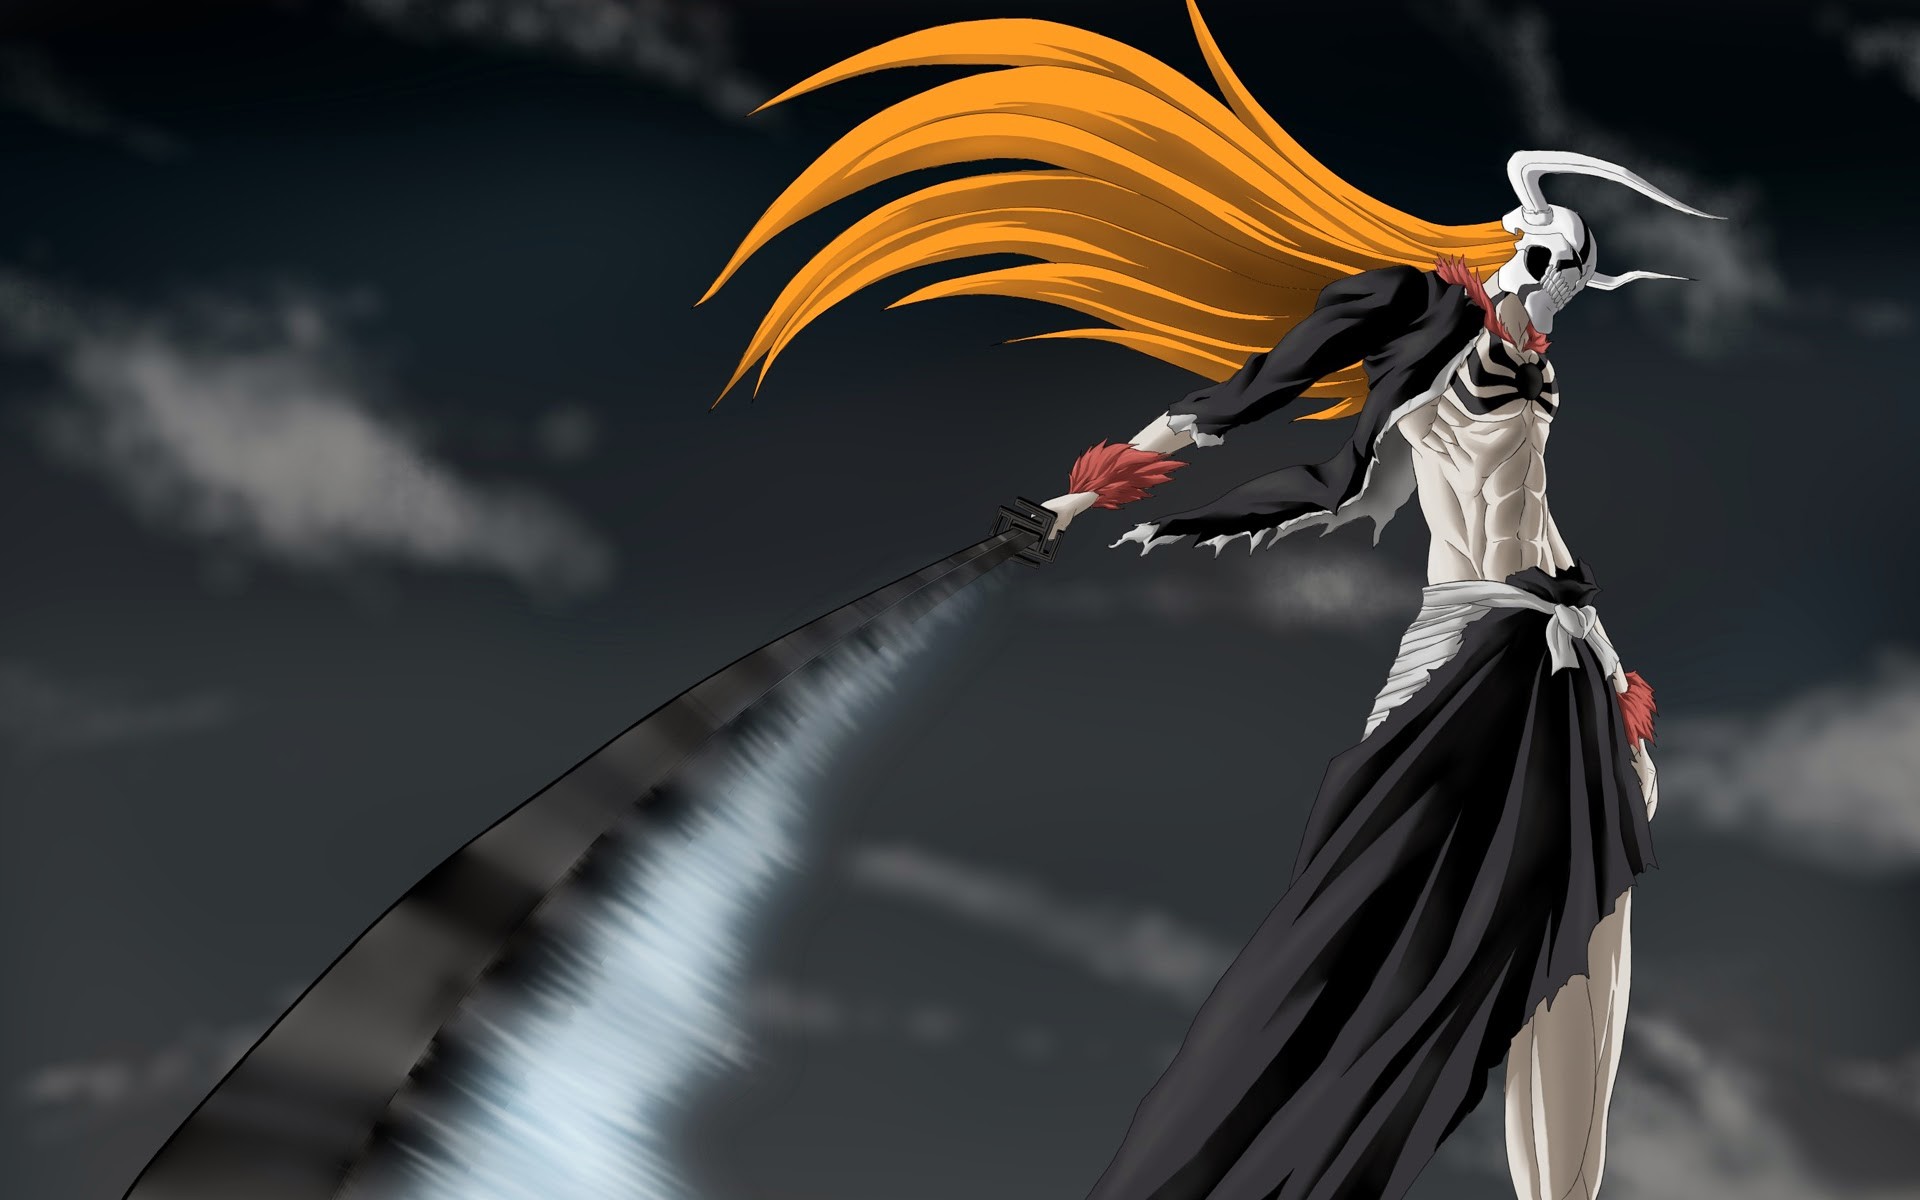 Hollow Ichigo Final Form Wallpapers Picture Bleach Hollow Vs Aizen 1920 1200 Hollow Ichigo Wallpapers 1920x1200